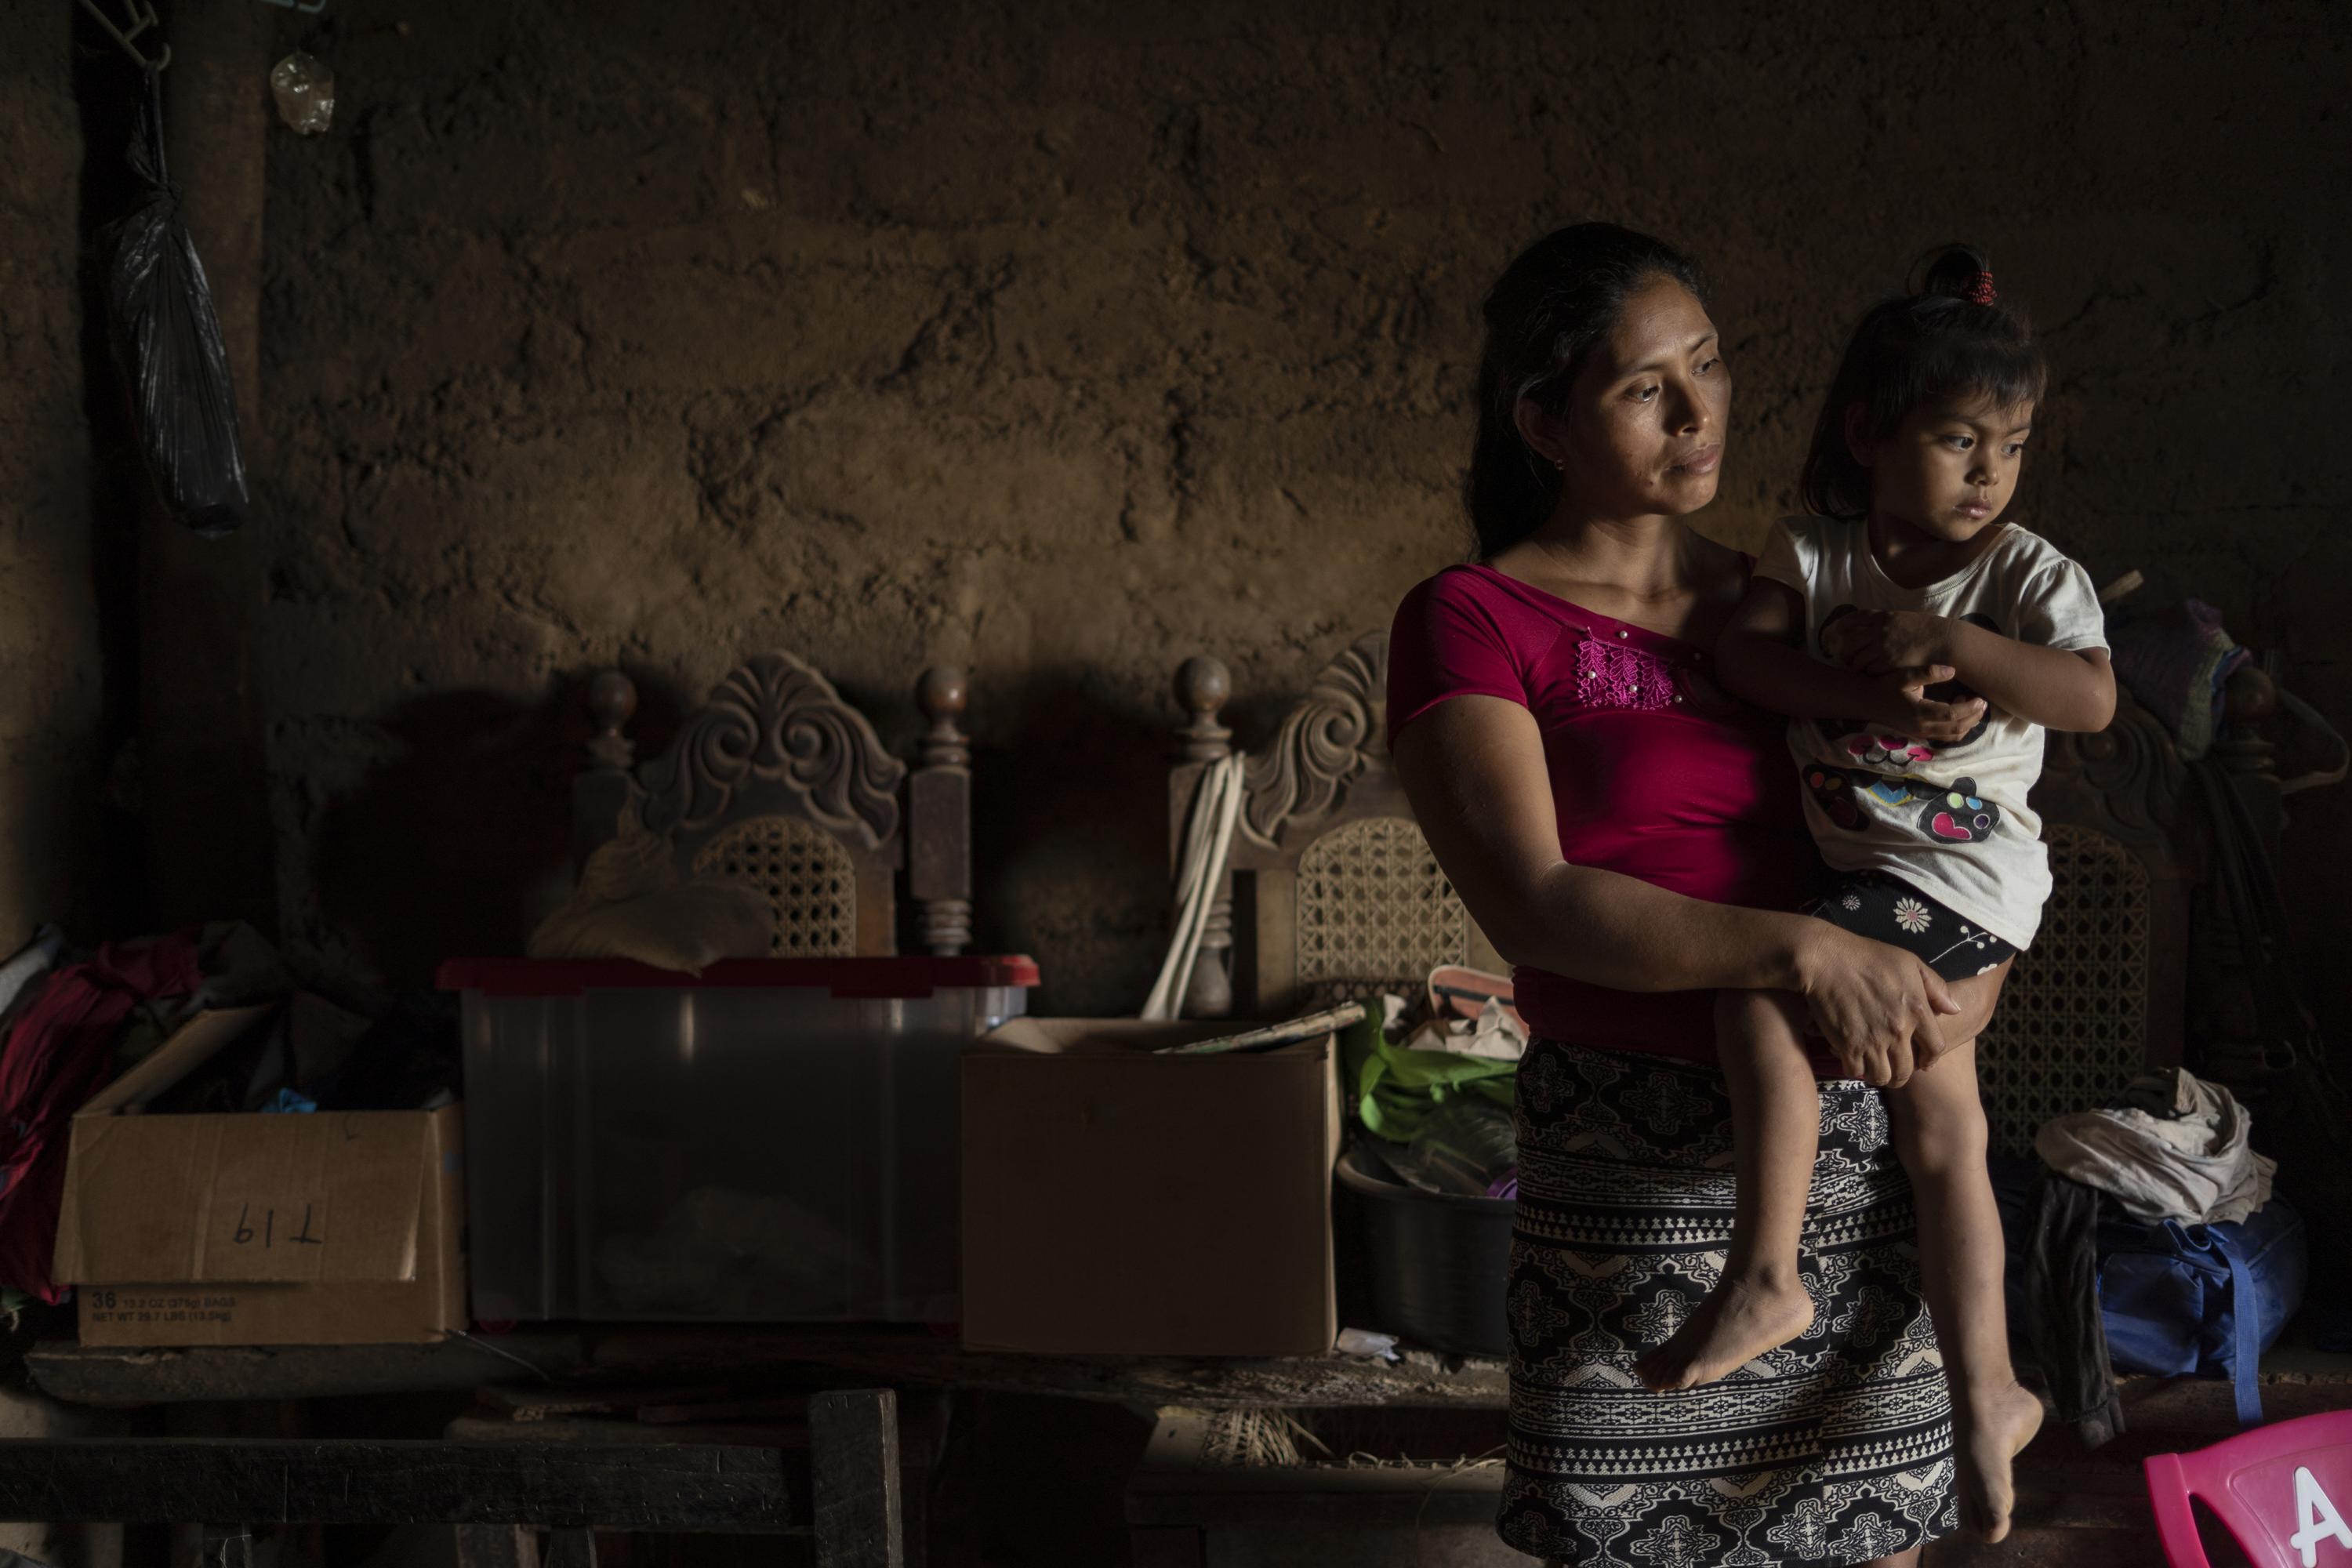 Maura Dolores holds her three-year-old daughter, Deysi Nohemy López, in their home in the small community of El Jícaro Centro, in Tacuba, Ahuachapán. In Maura’s pantry, there are a couple of cardboard boxes and a plastic container with a few packets of instant coffee, some rice, soap, bouillon cubes, and menstrual pads. Since her husband’s arrest under the state of exception, Maura and her four children have had to skip one meal a day. When they do eat, they have to ration what little they have, for example, by dividing four eggs between five people over the course of a week.